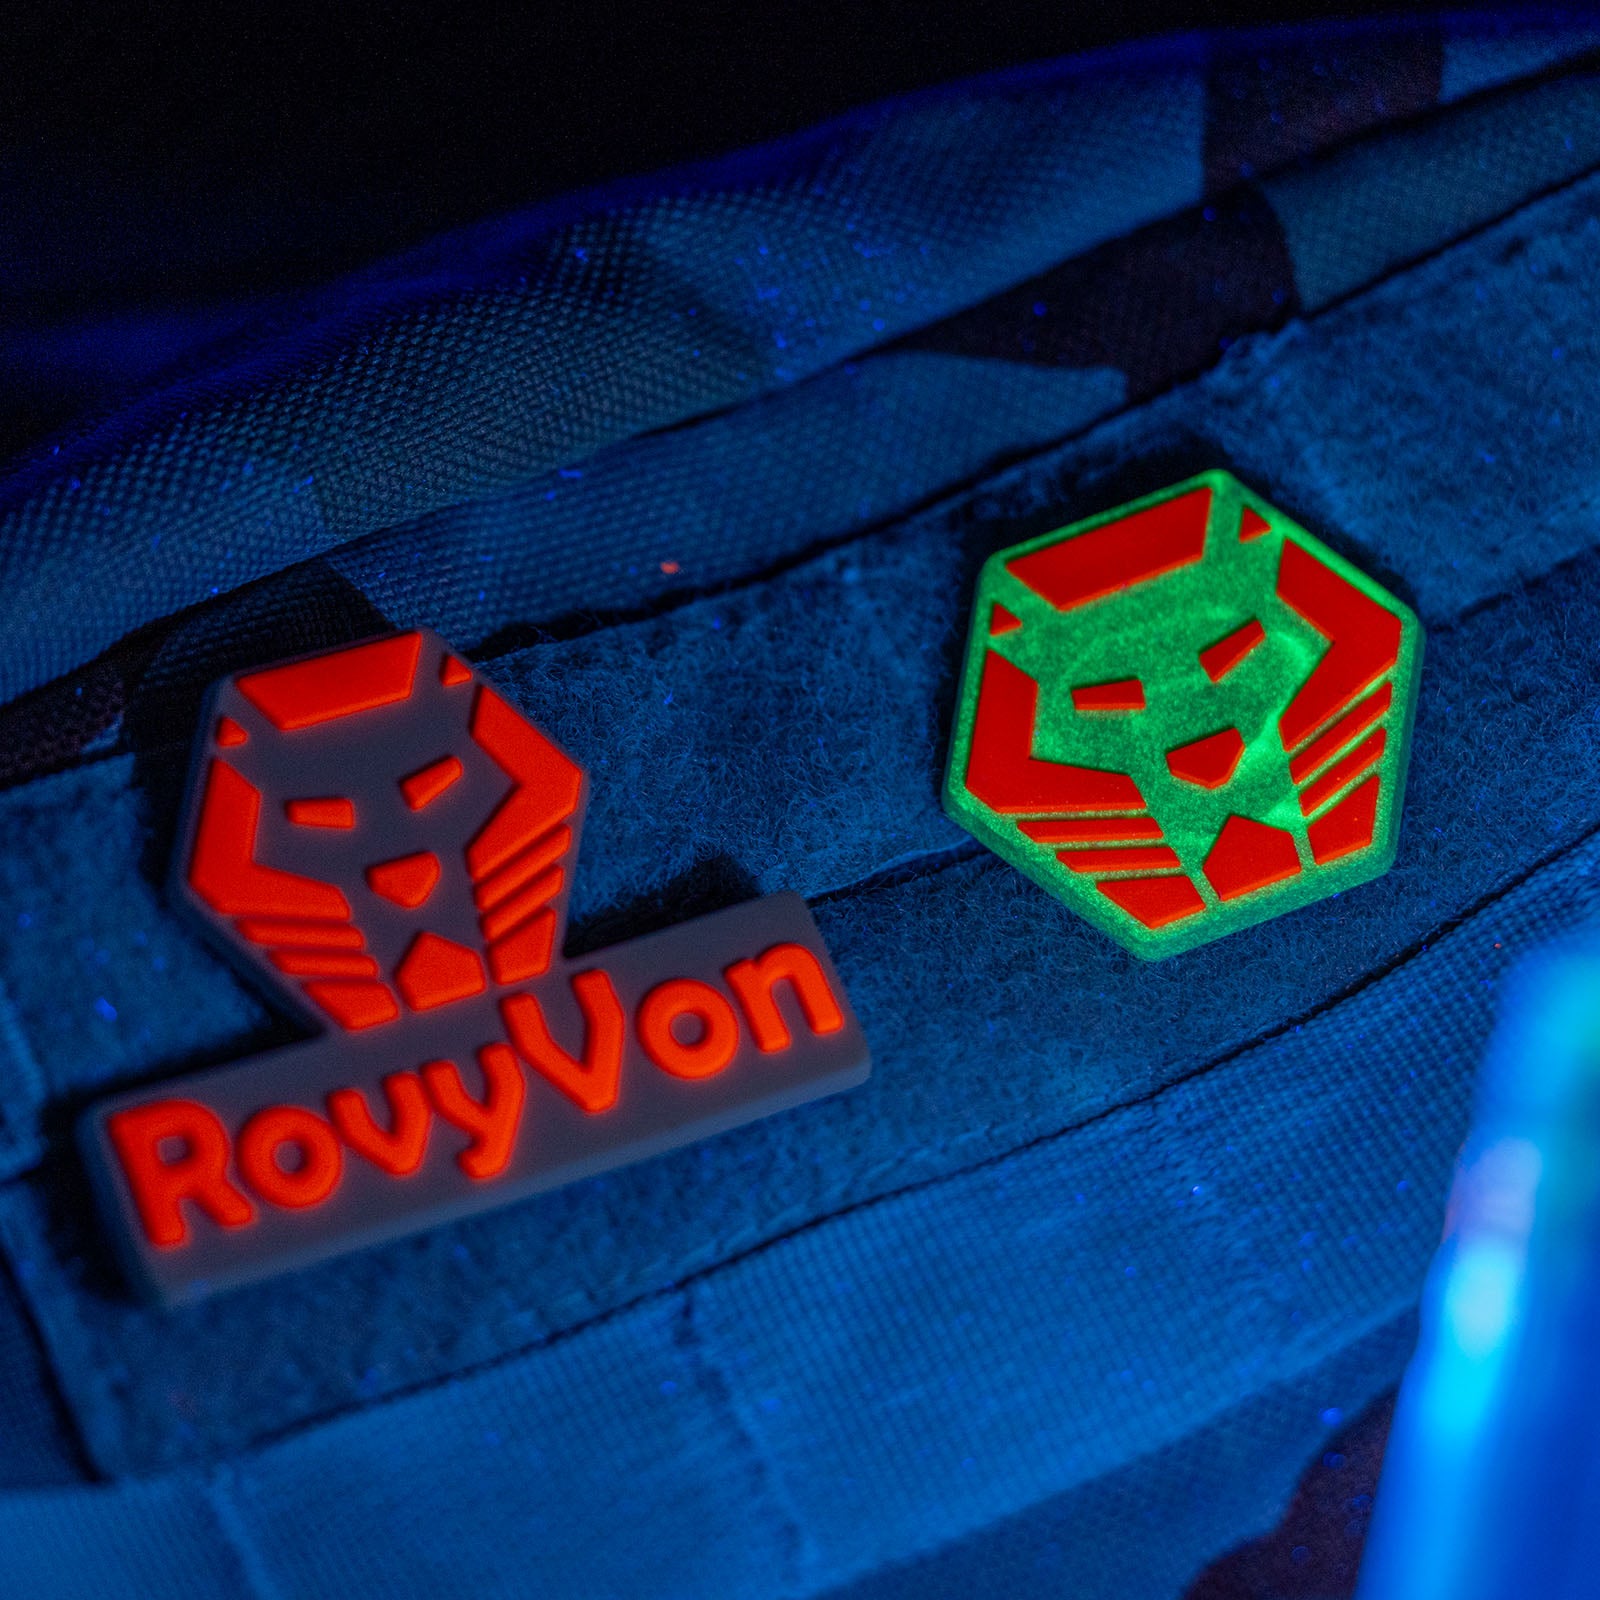 RovyVon Patches/Stickers